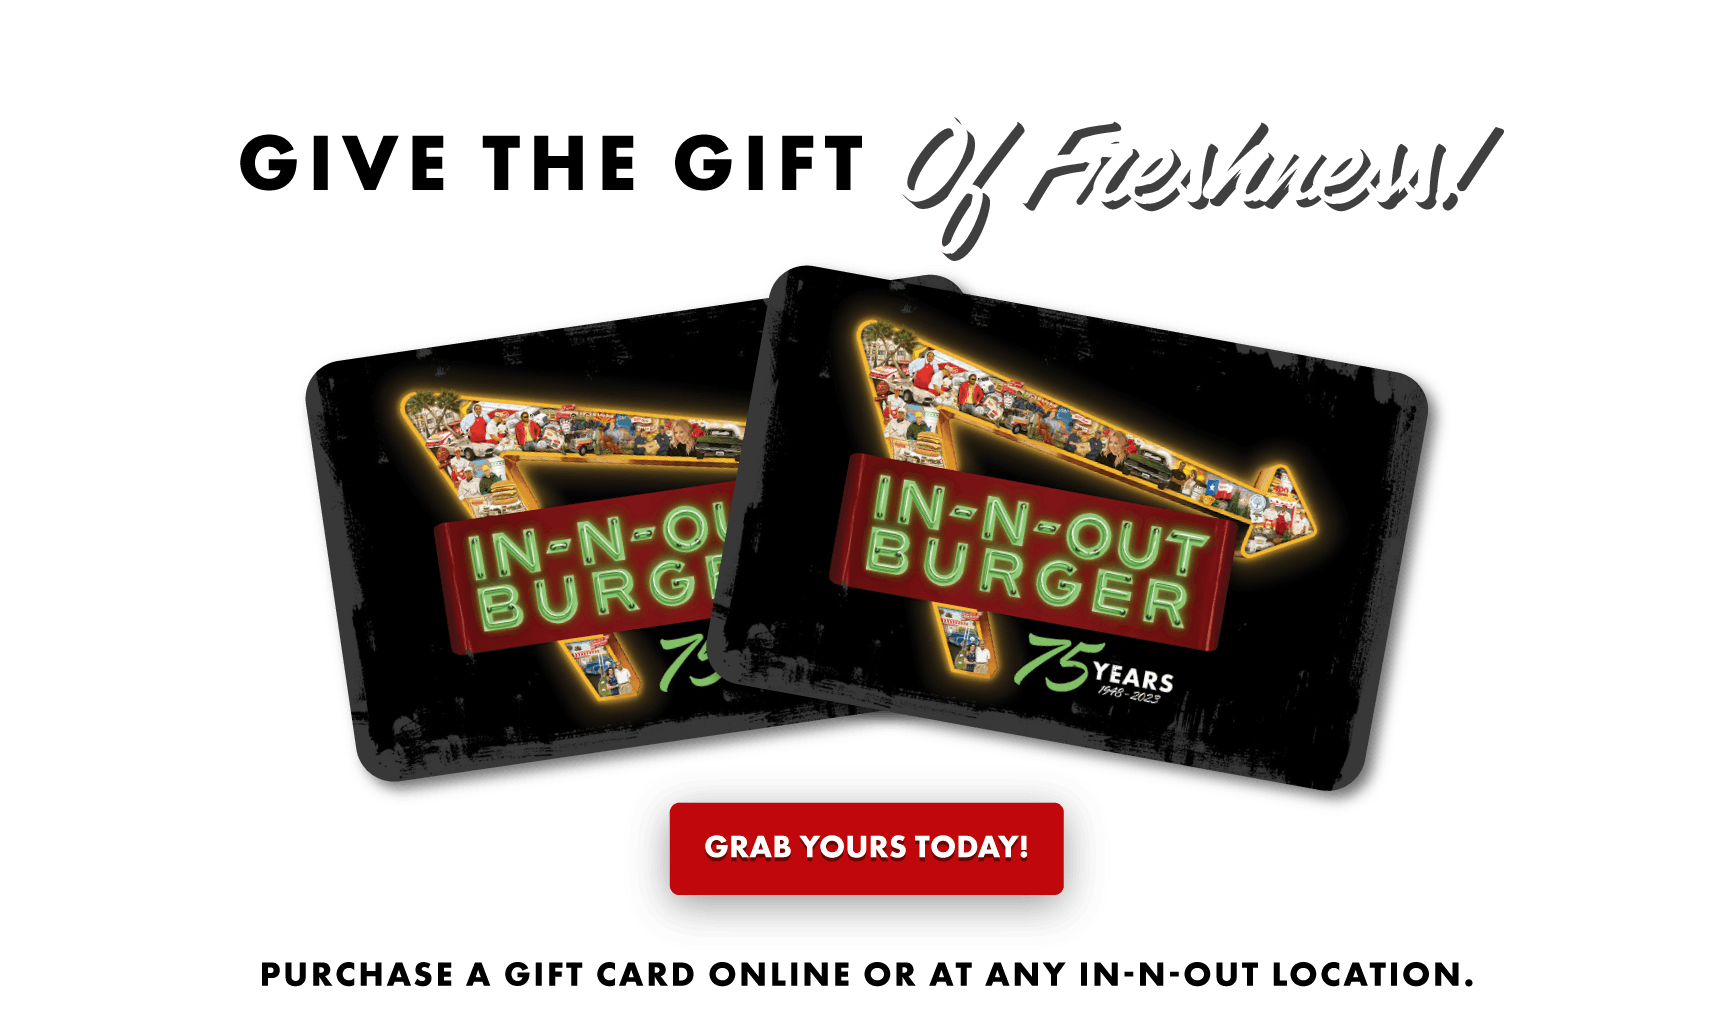 Give the Gift of Freshness